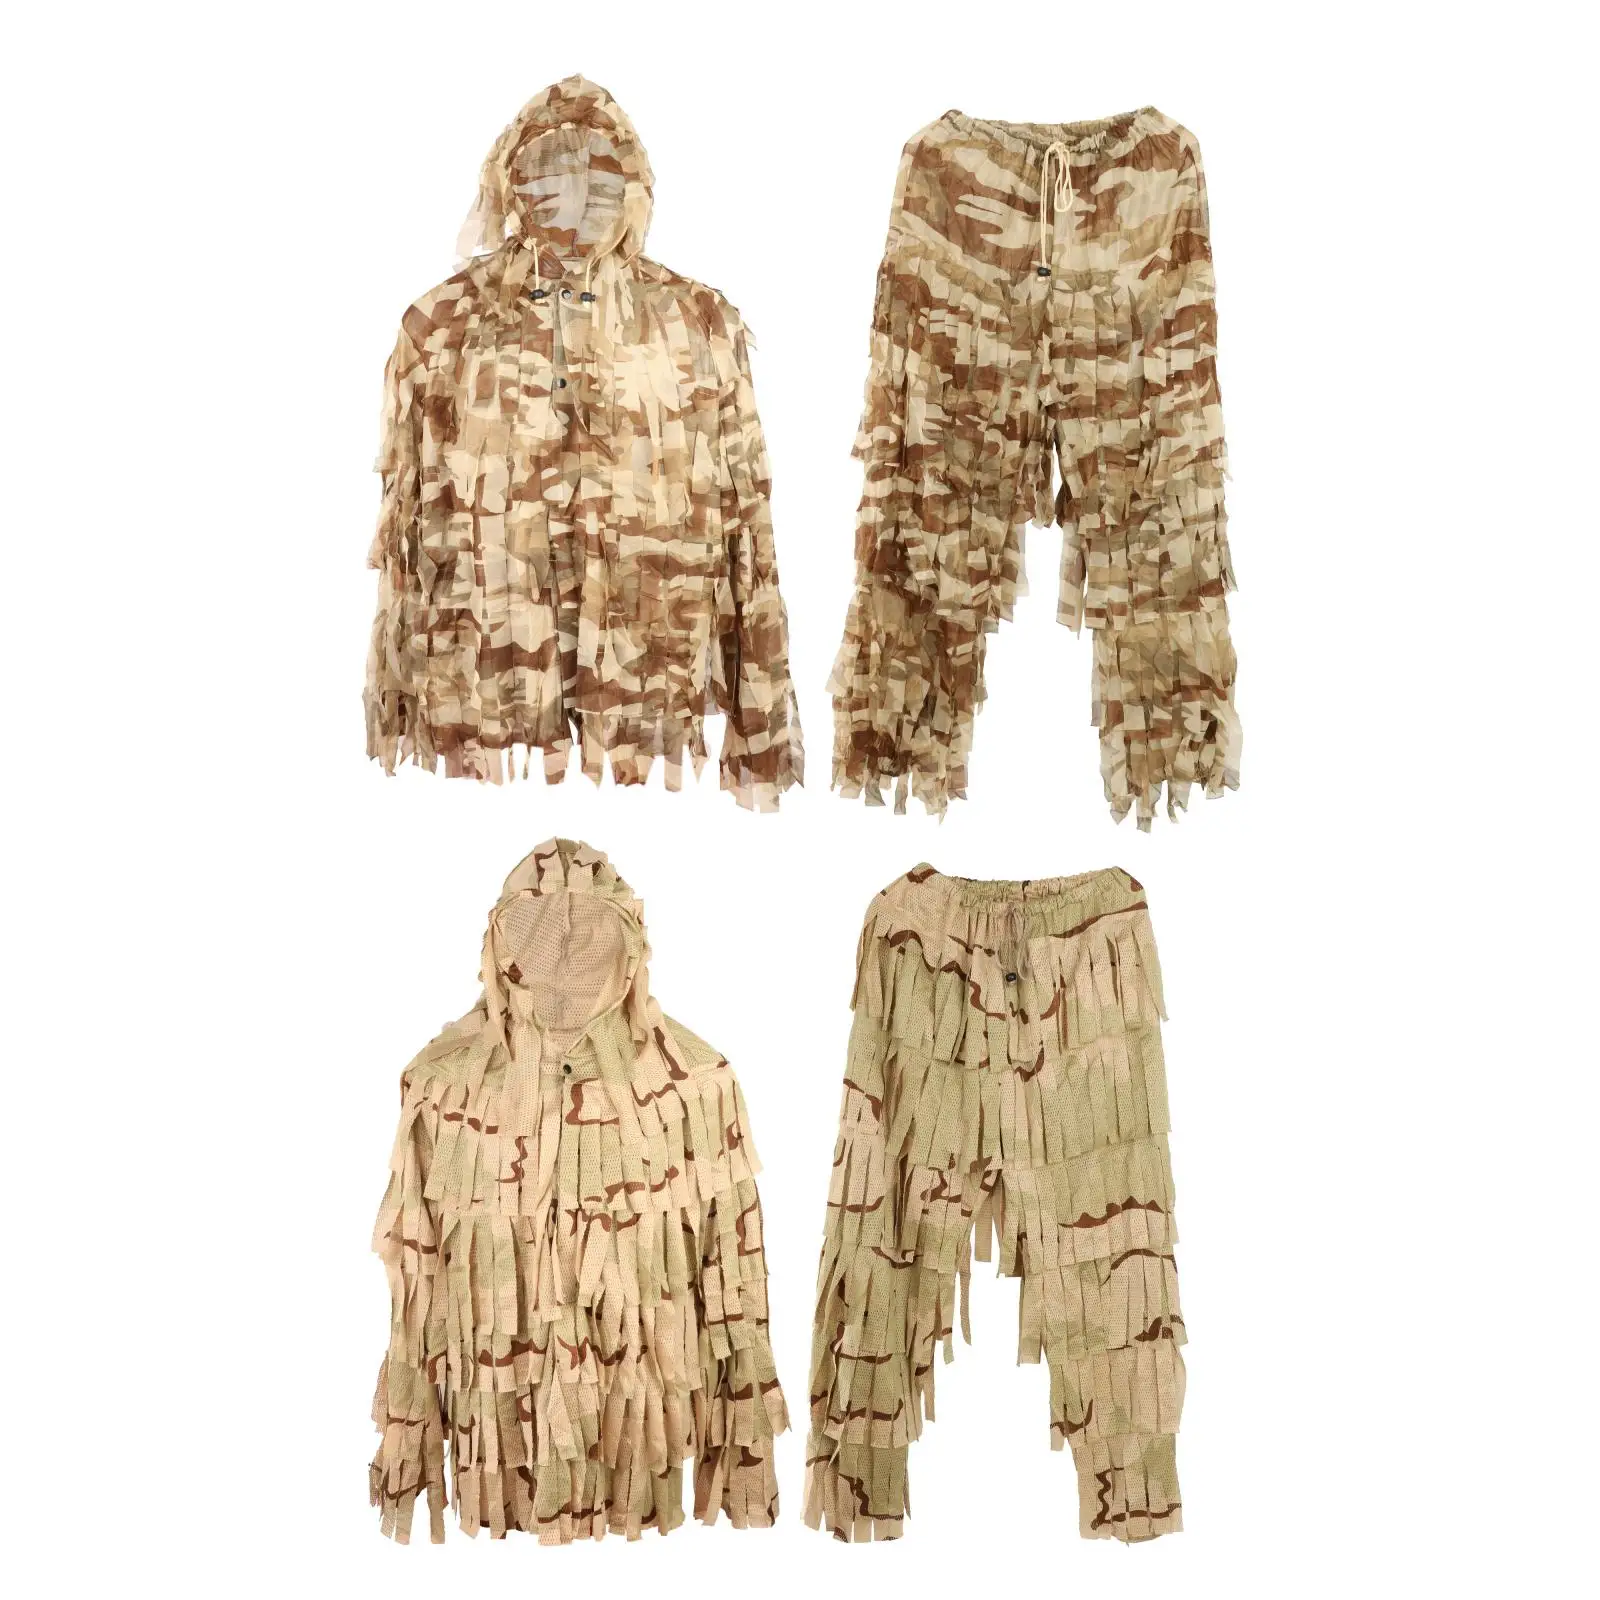 Hunting clothes 3D Bionic Ghillie Suits sniper Camouflage Clothing jacket and pants